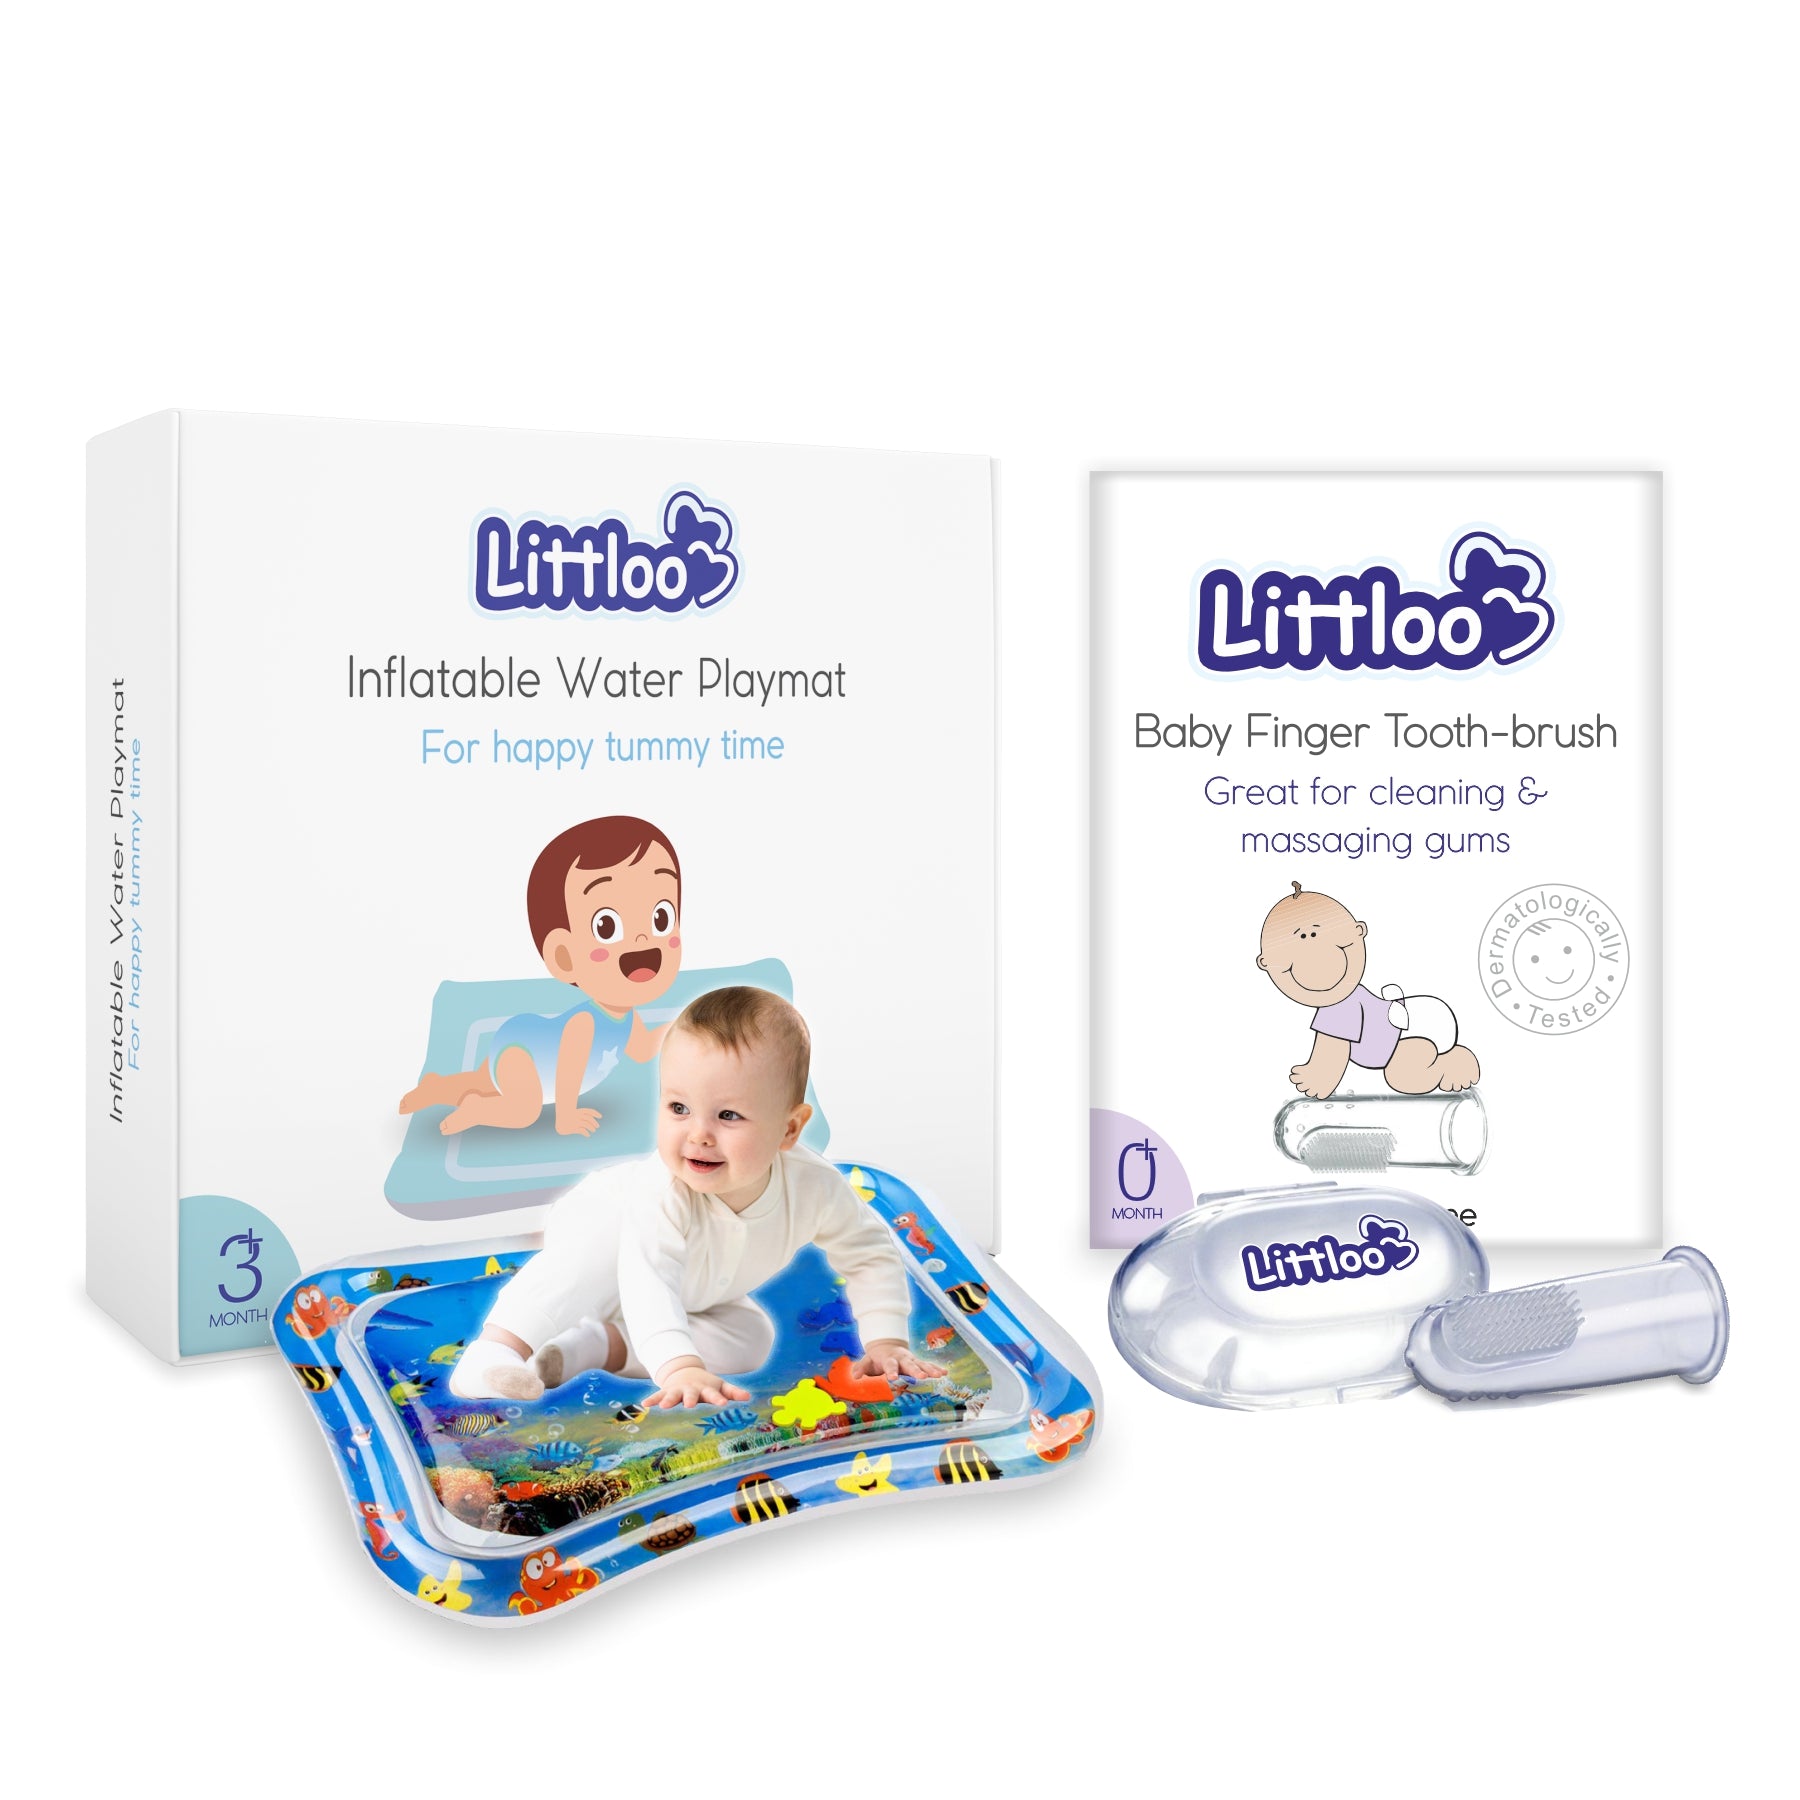 Water Play Mat and Finger Toothbrush - Littloo